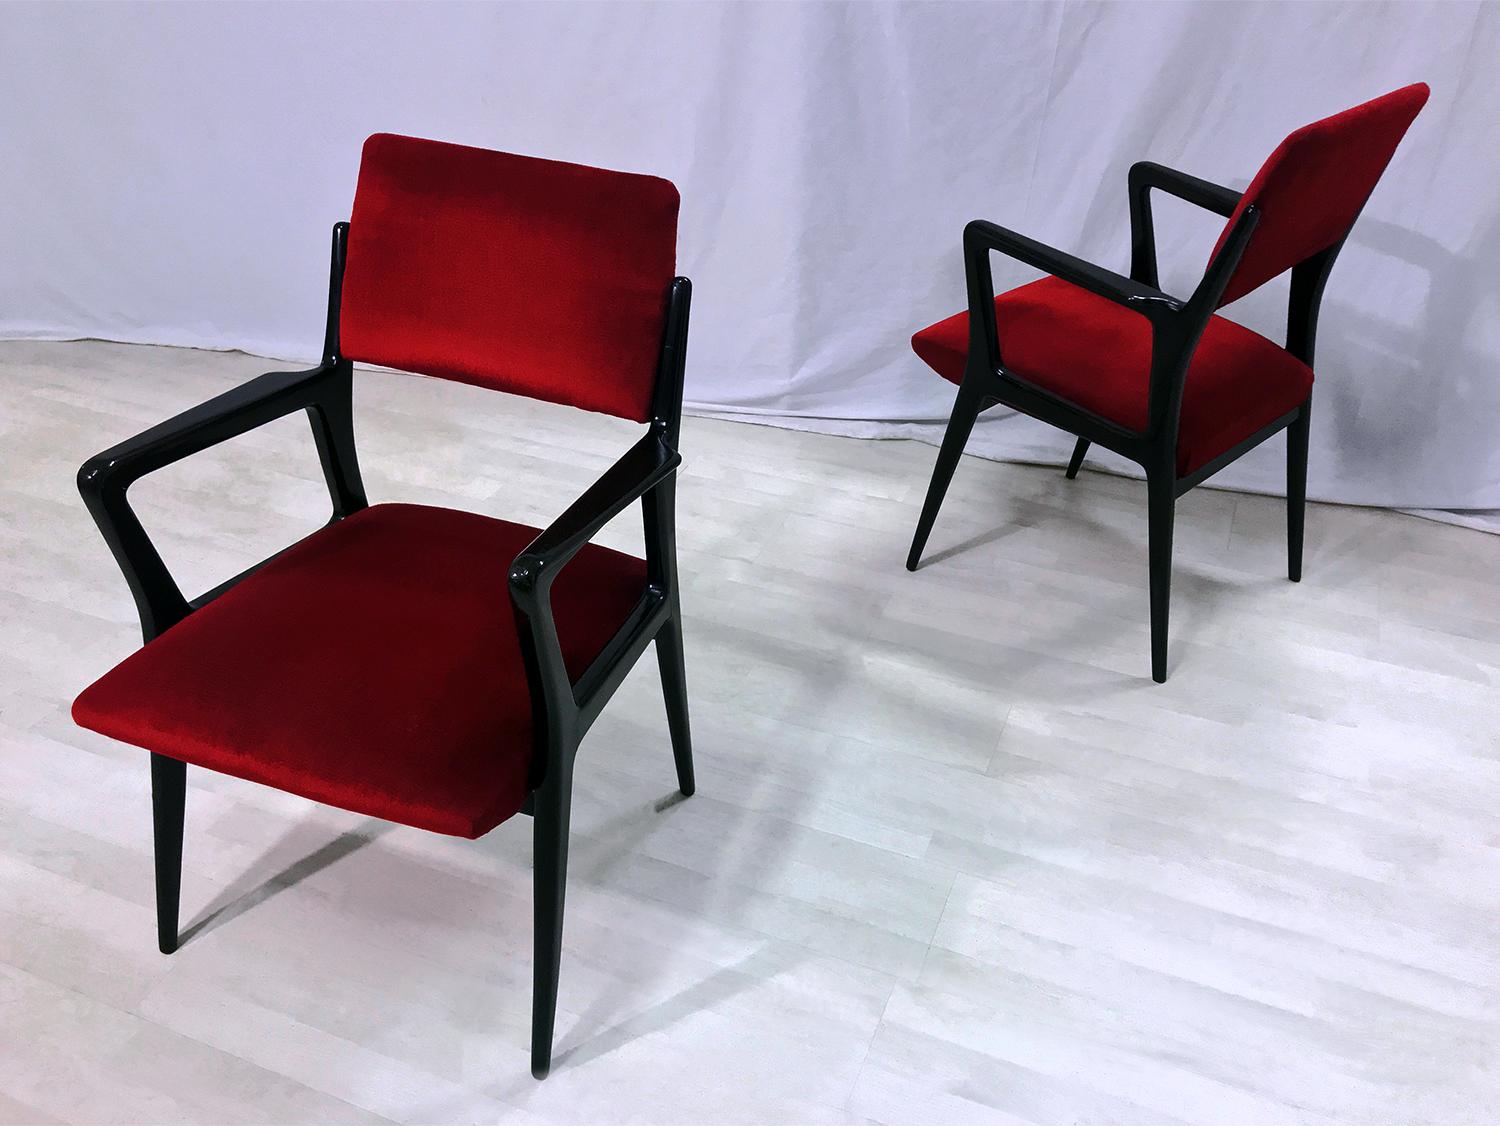 Pair of Italian Mid-Century Scarlet Red Velvet Armchairs, 1950s In Good Condition For Sale In Traversetolo, IT